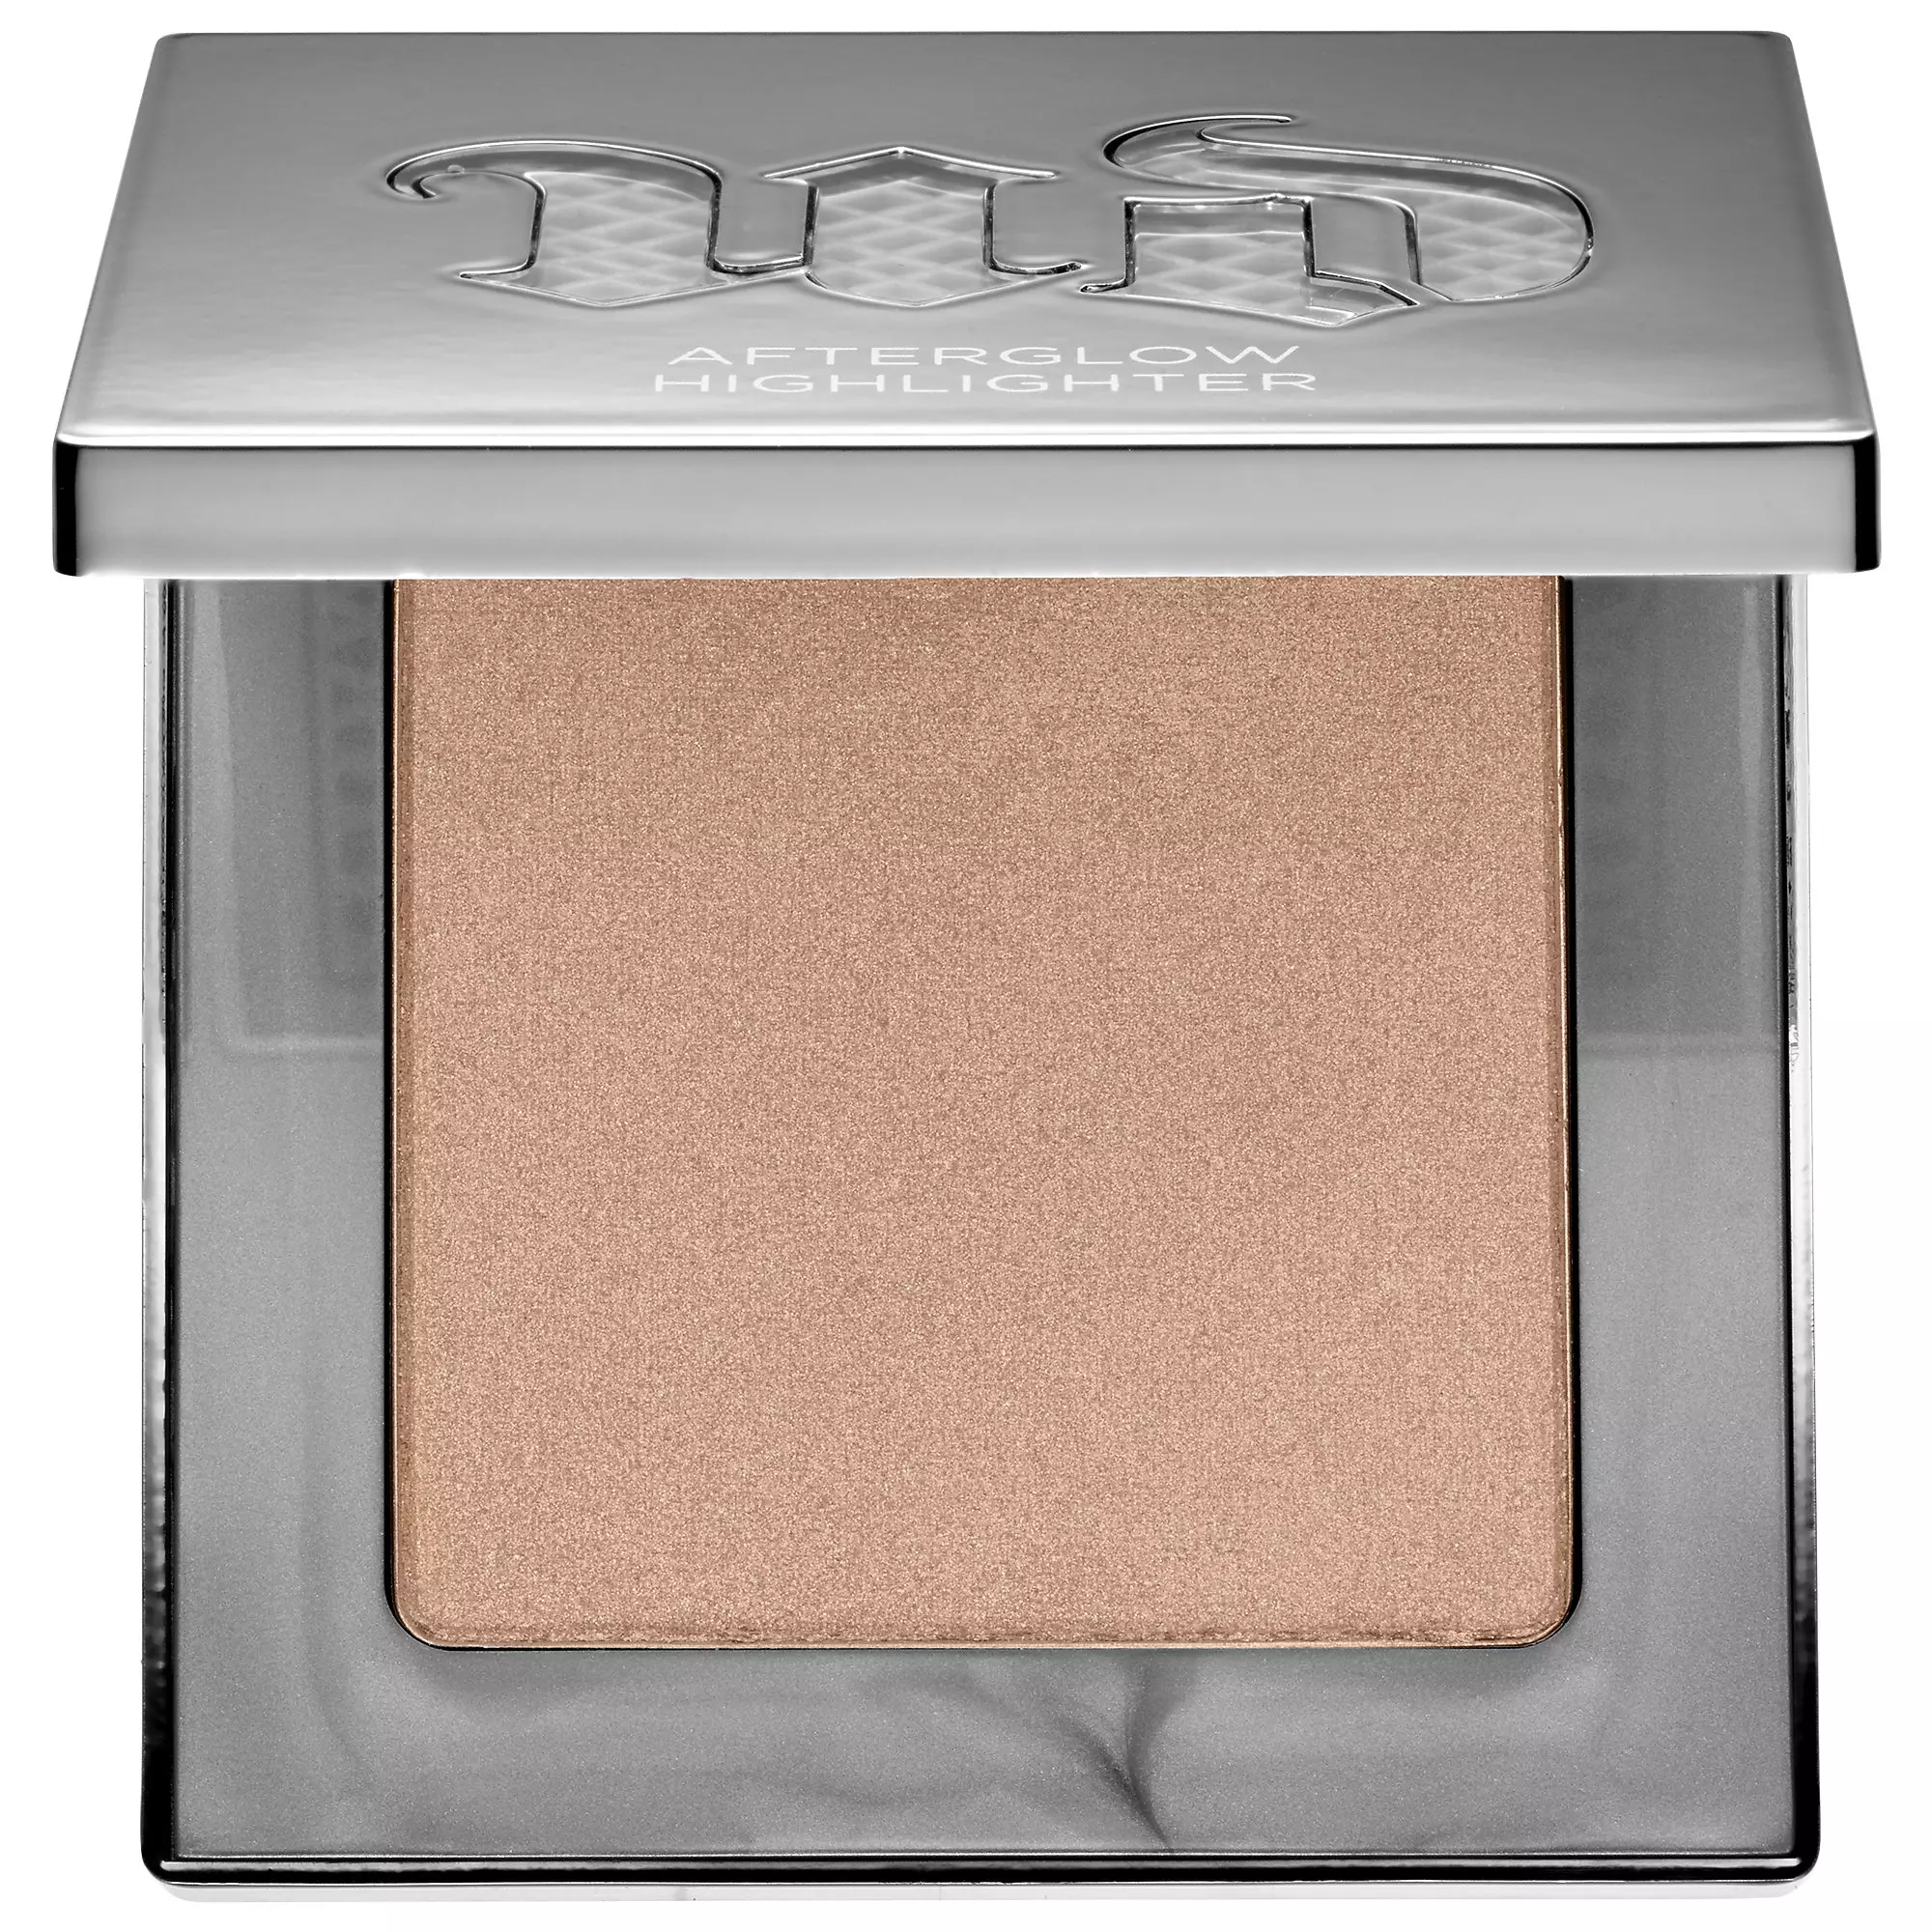 Urban Decay Afterglow 8-Hour Powder Highlighter Sin Glambot.com - Best deals on Urban Decay cosmetics